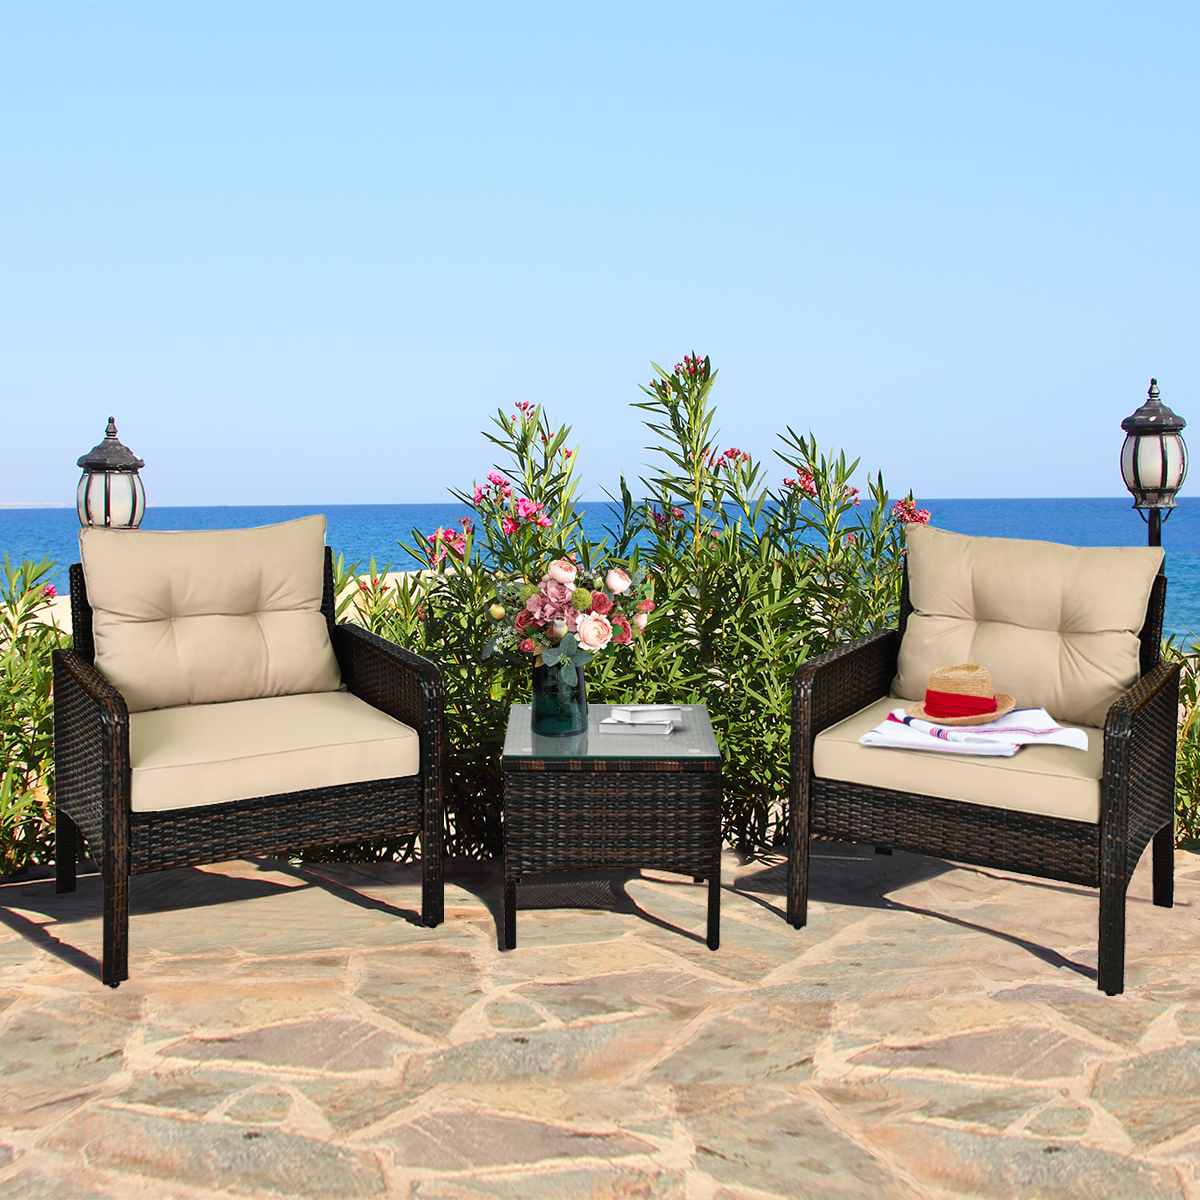 3PCS Patio Outdoor Rattan Furniture Set Brown W/ Cushioned Chairs Coffee Table